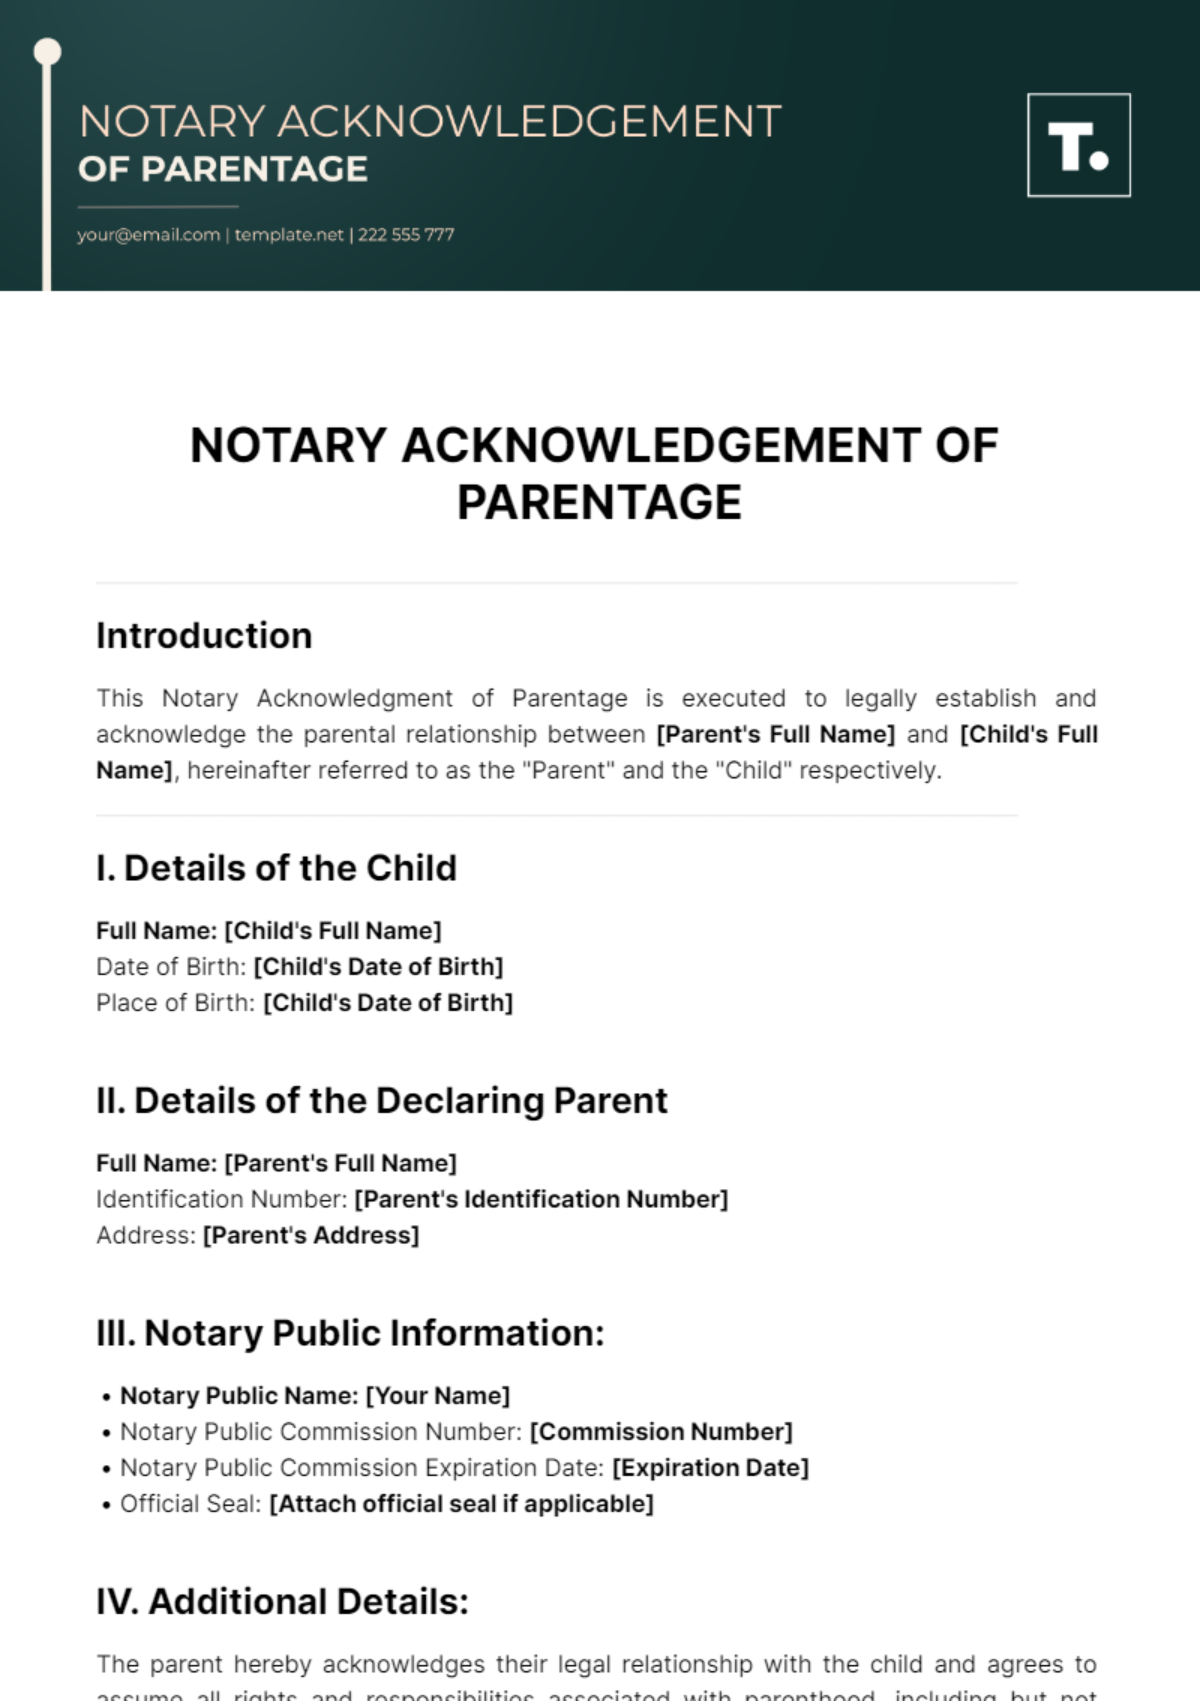 Free Notary Acknowledgement Of Parentage Template